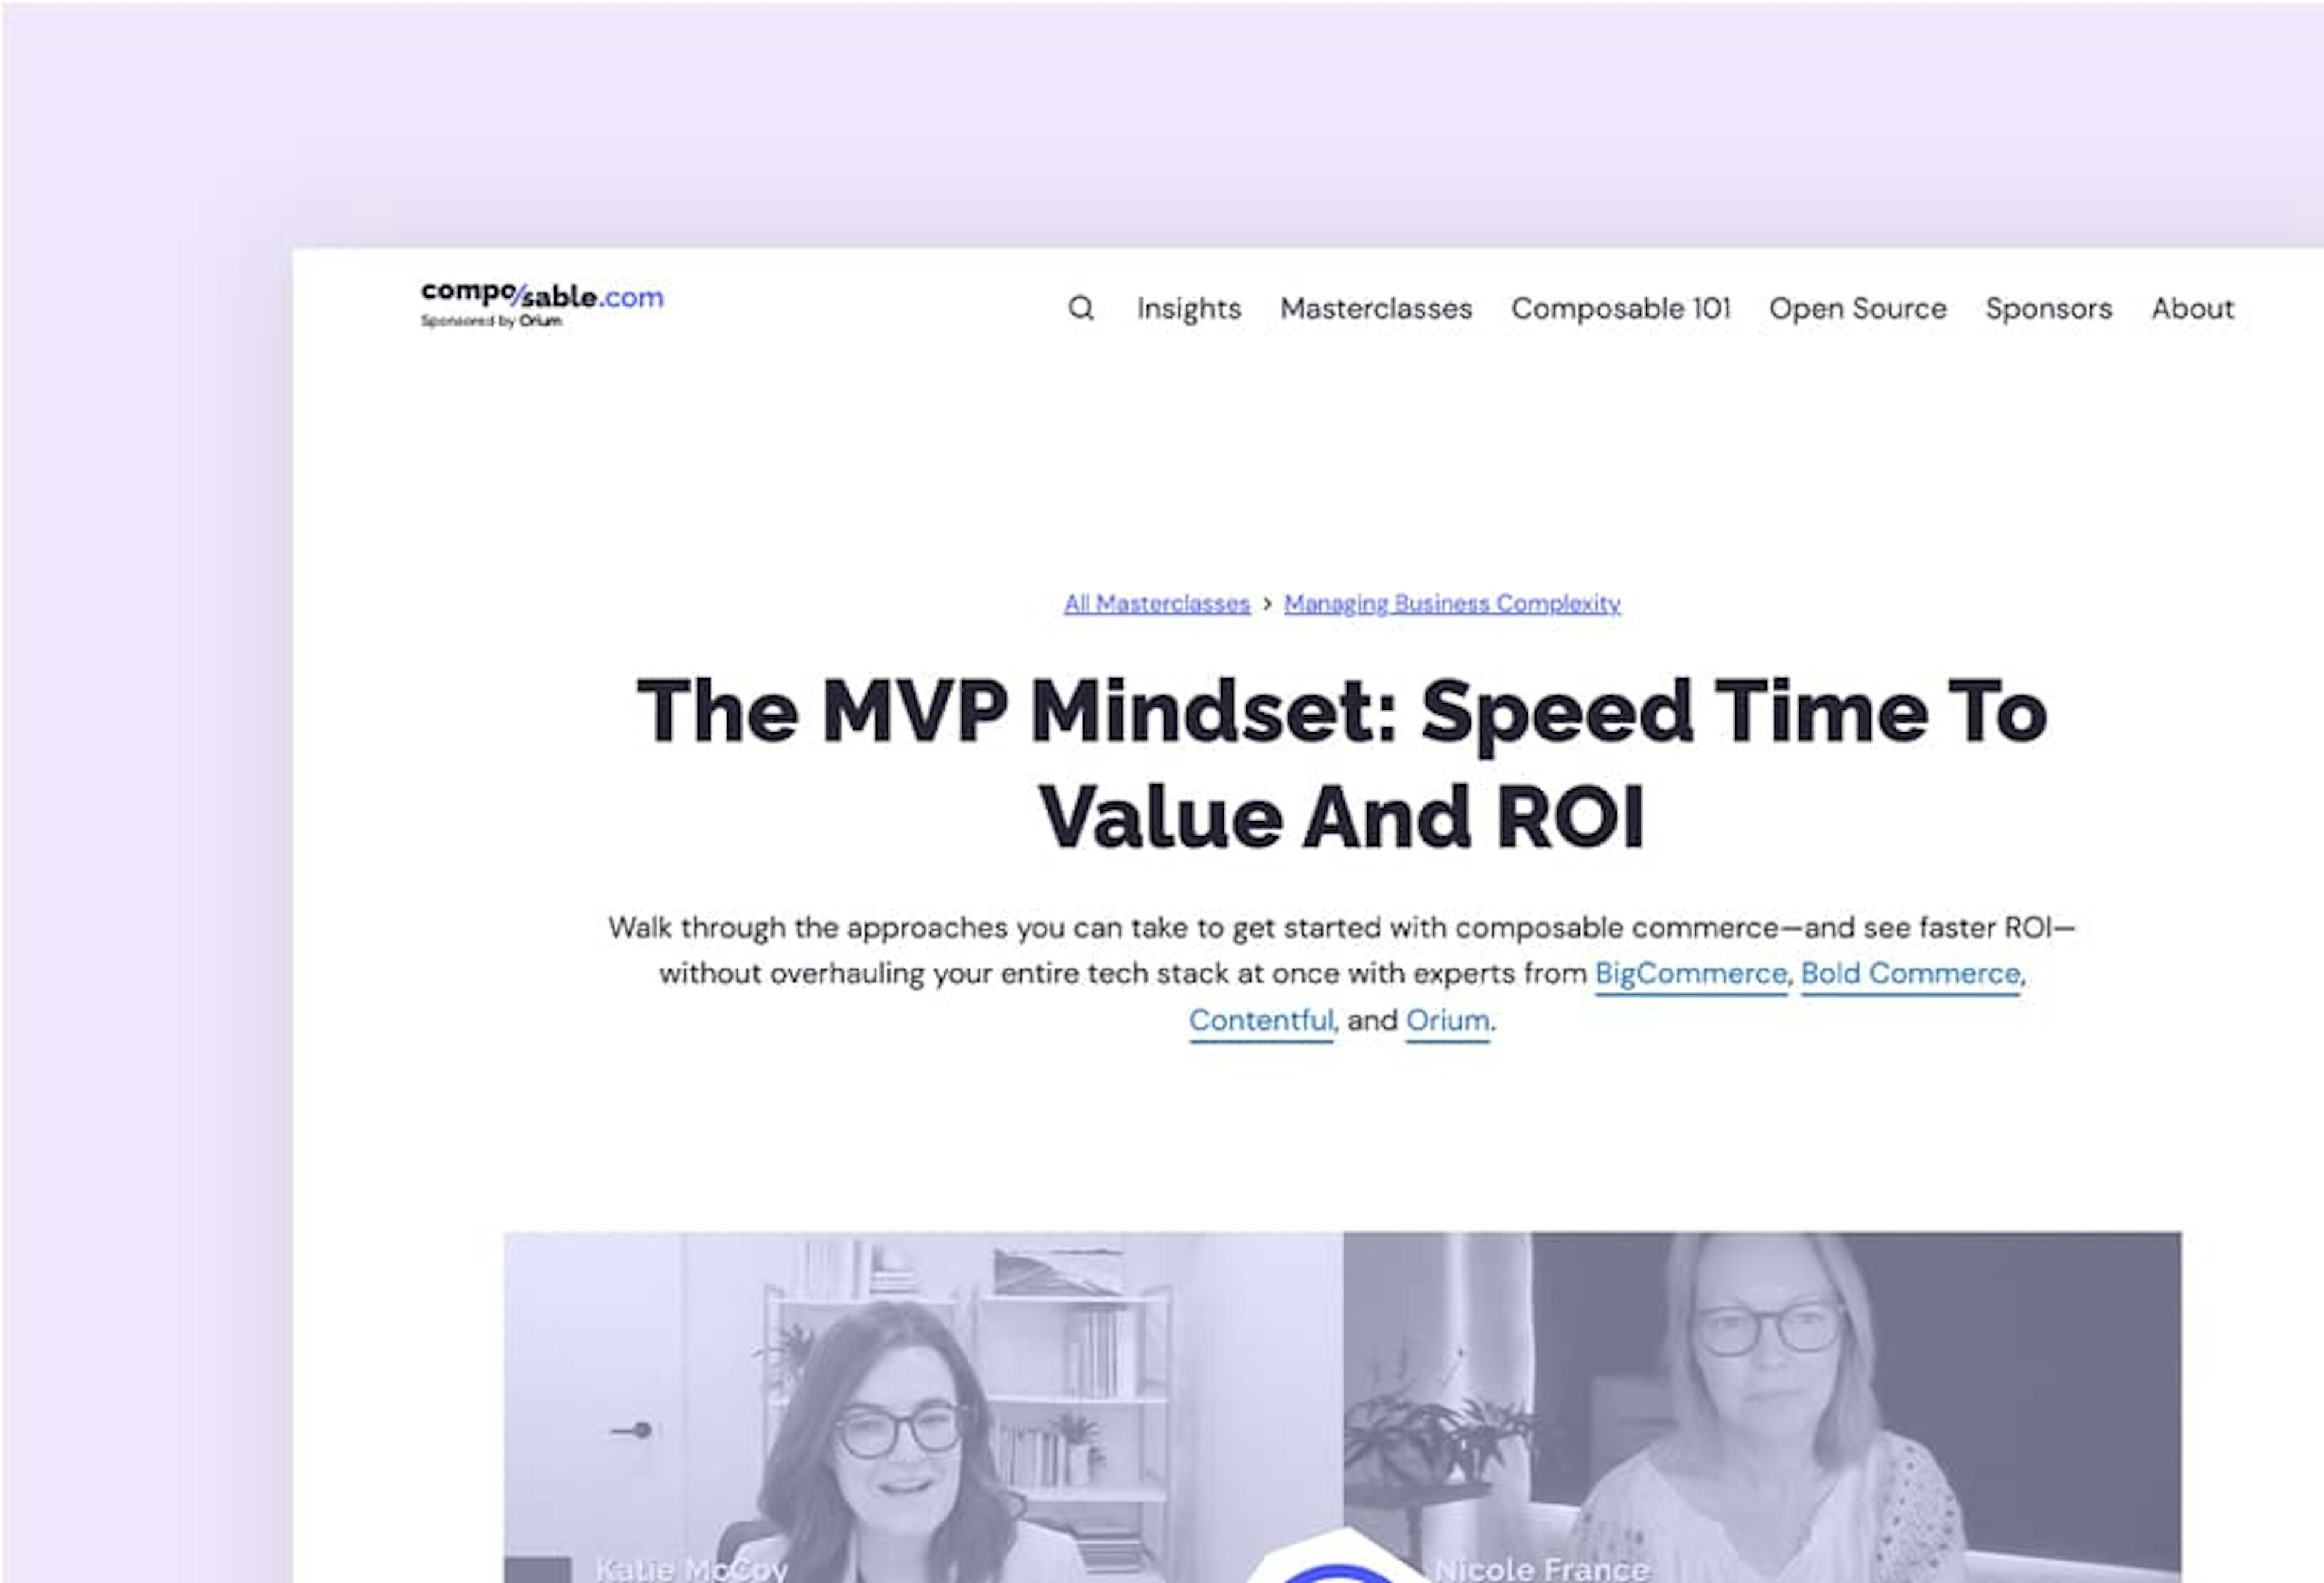 A screenshot of "The MVP Mindset: Speed Time Value and ROI" masterclass on Composable.com.